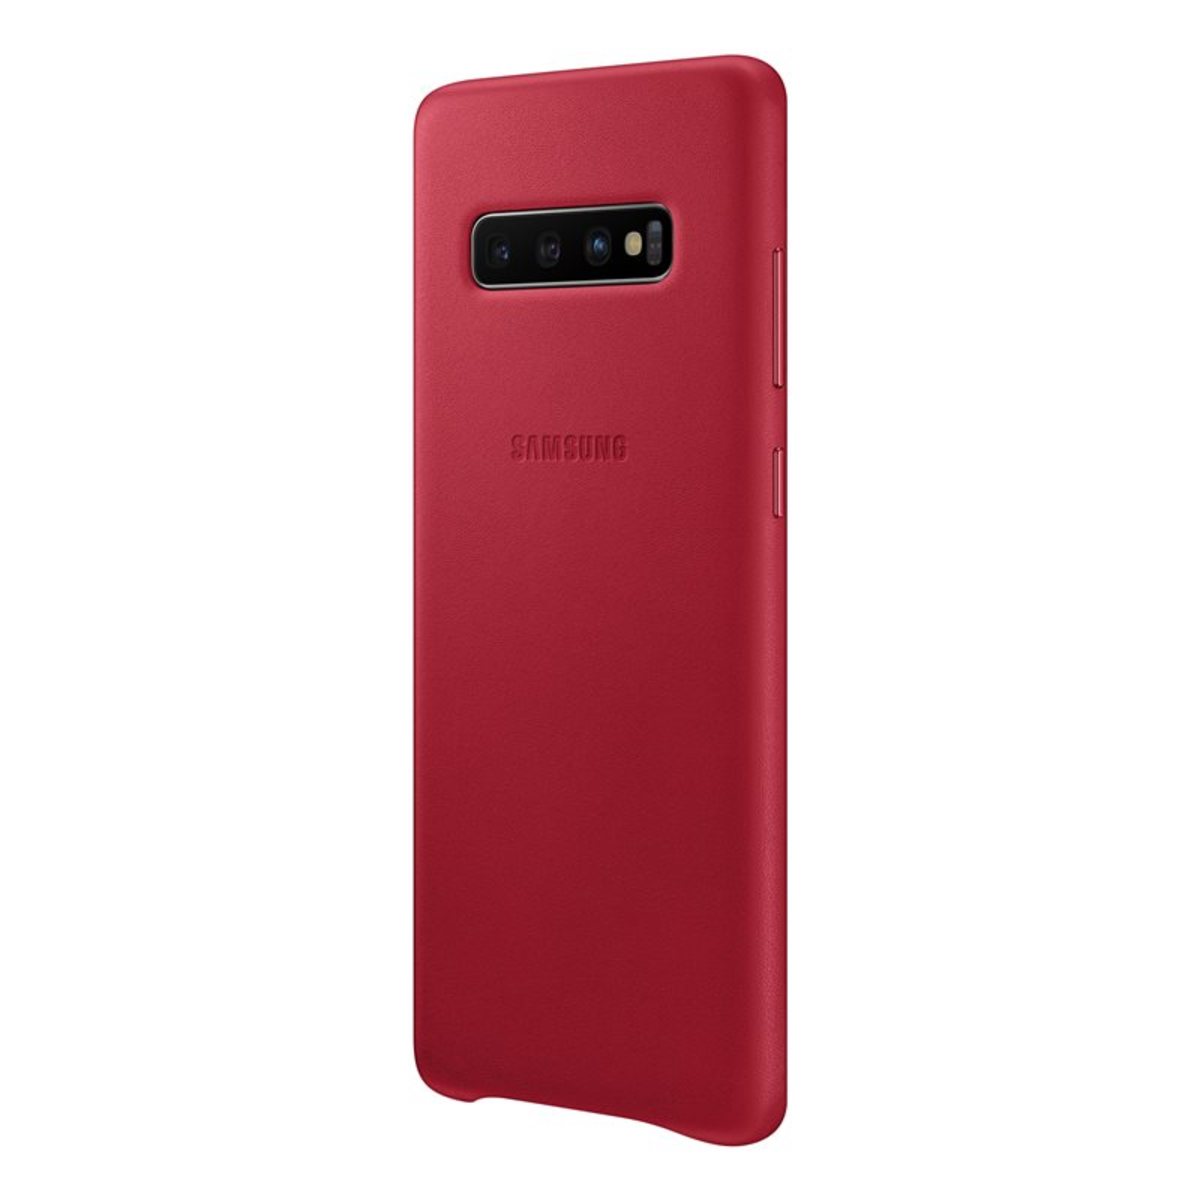 Samsung Galaxy S10 Plus Leather Book Cover Red VG975LR